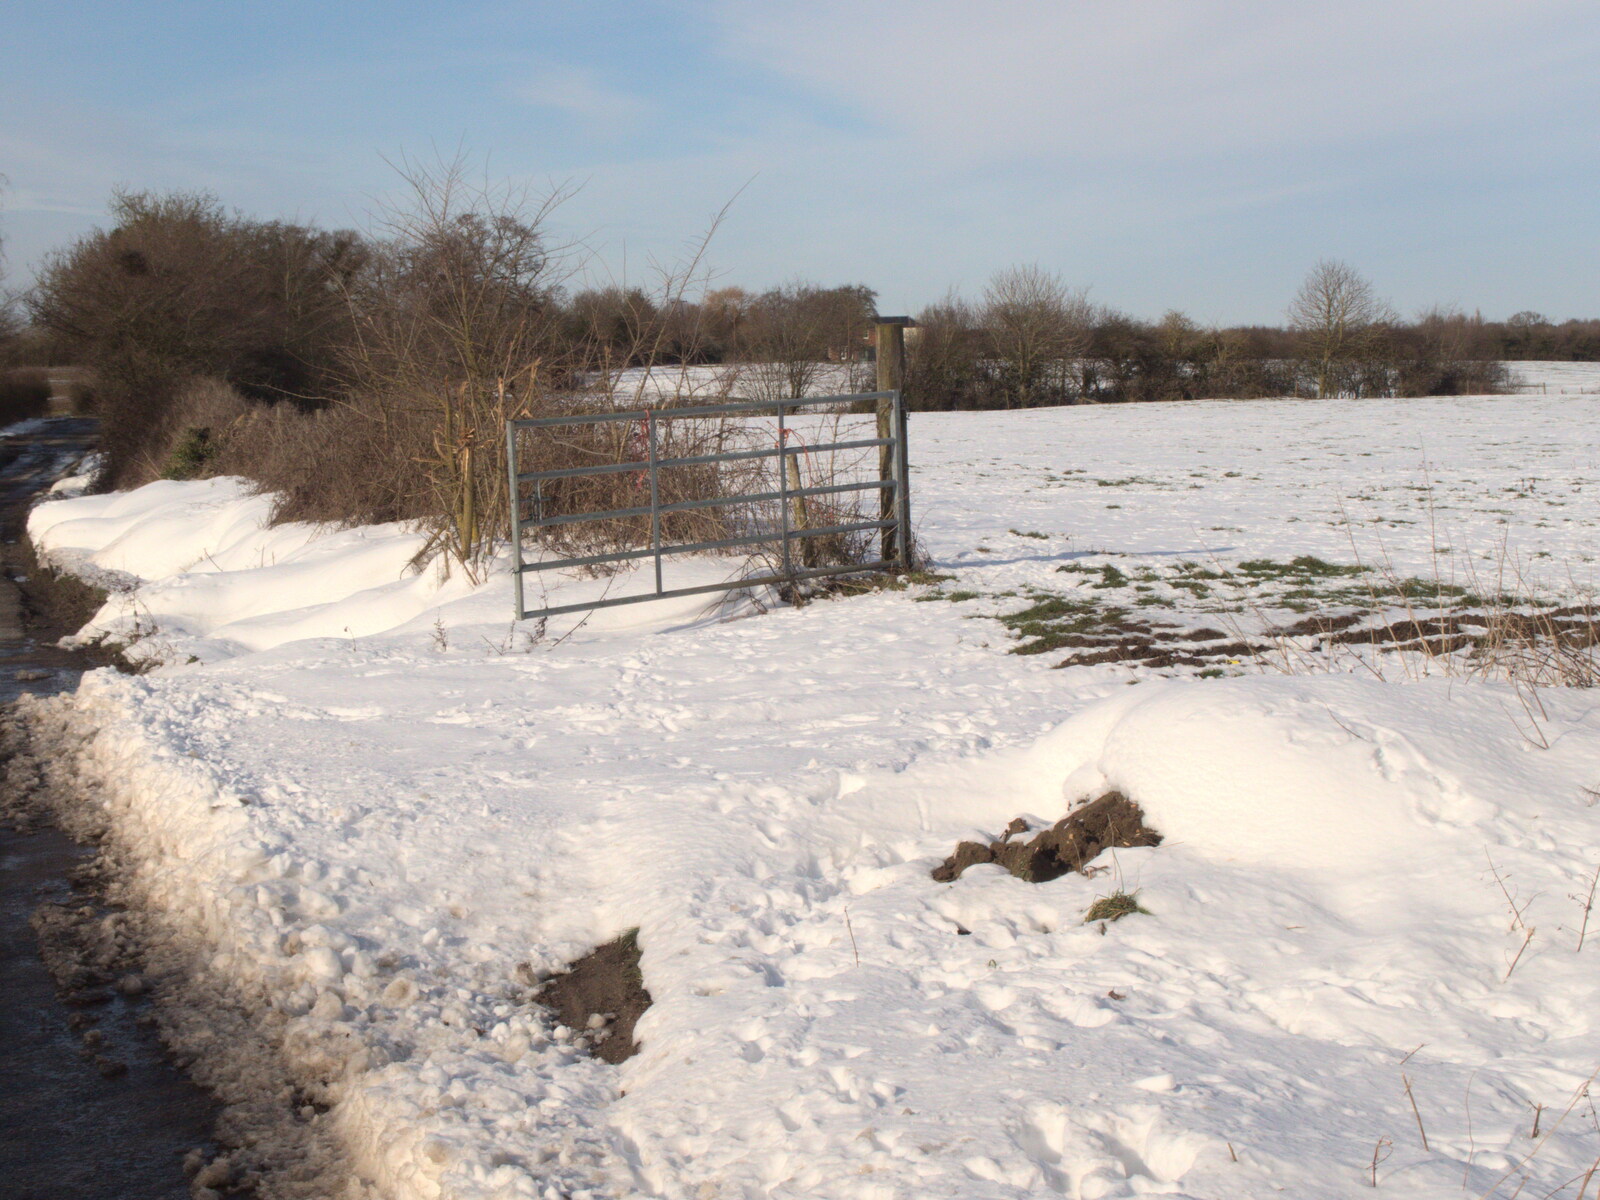 Snow drifts and a gate on the Thrandeston Road from Derelict Infants School and Ice Sculptures, Diss and Palgrave, Norfolk and Suffolk - 13th February 2021